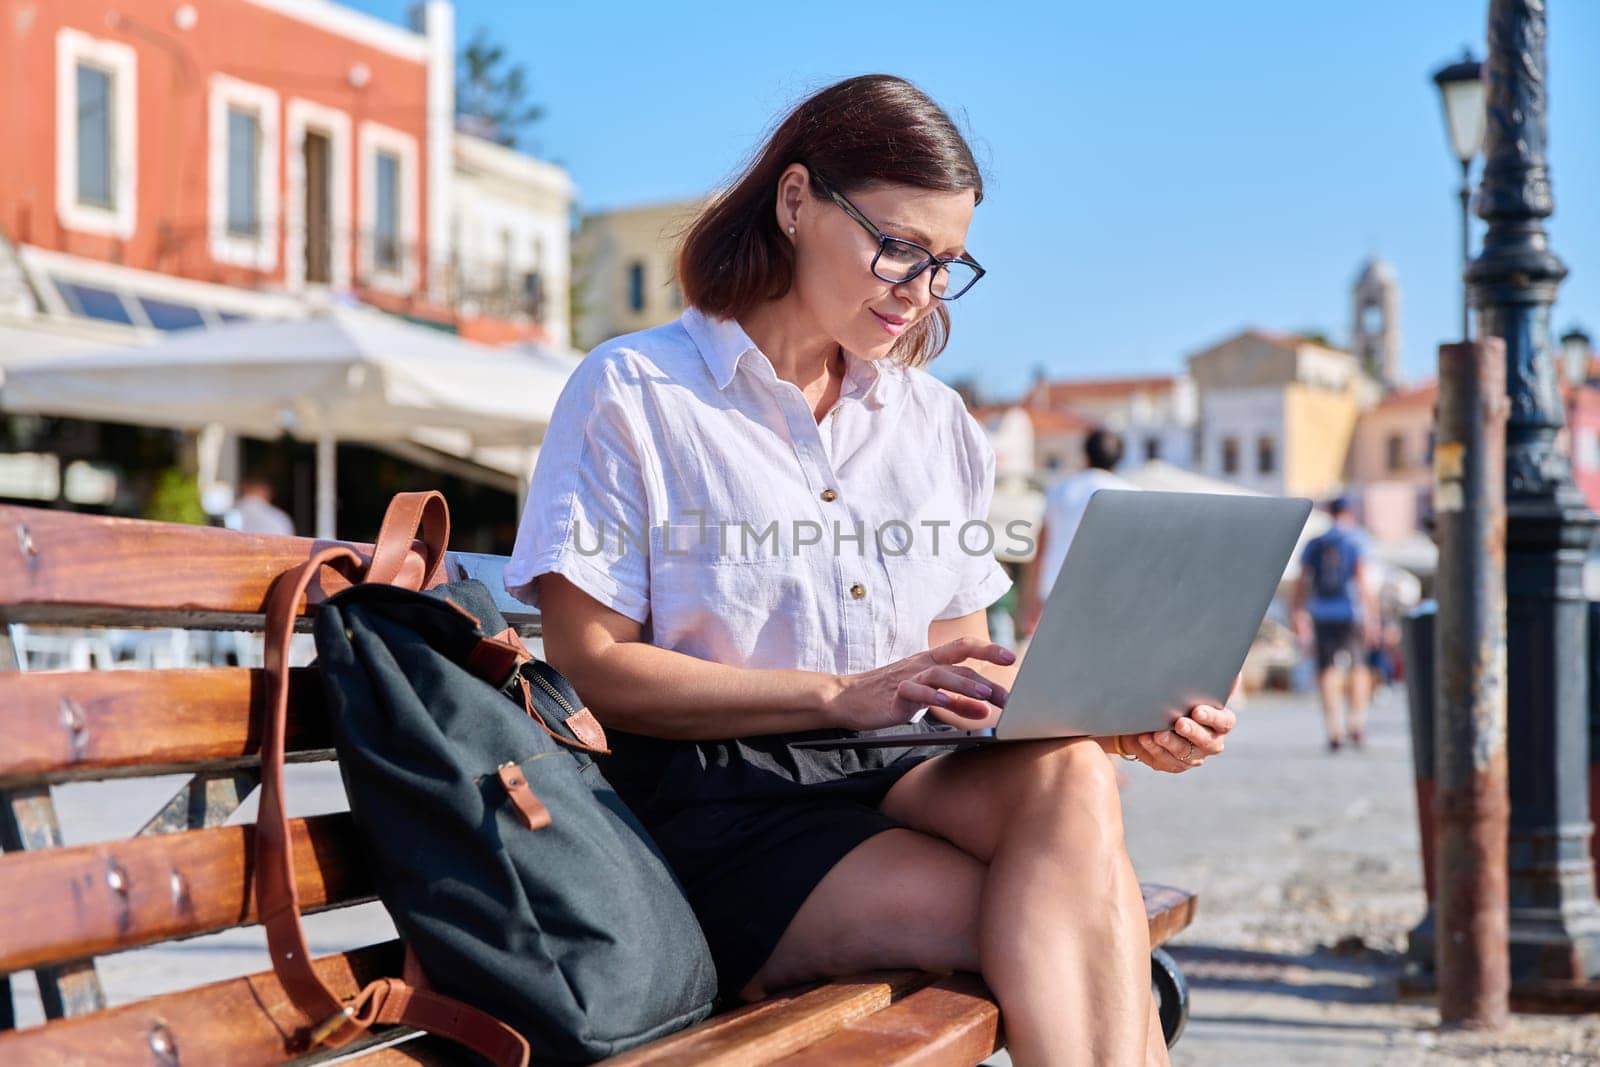 Middle-aged woman with a backpack sitting on a bench in an old tourist city, using a laptop. Freelance, business, technology, mature people concept